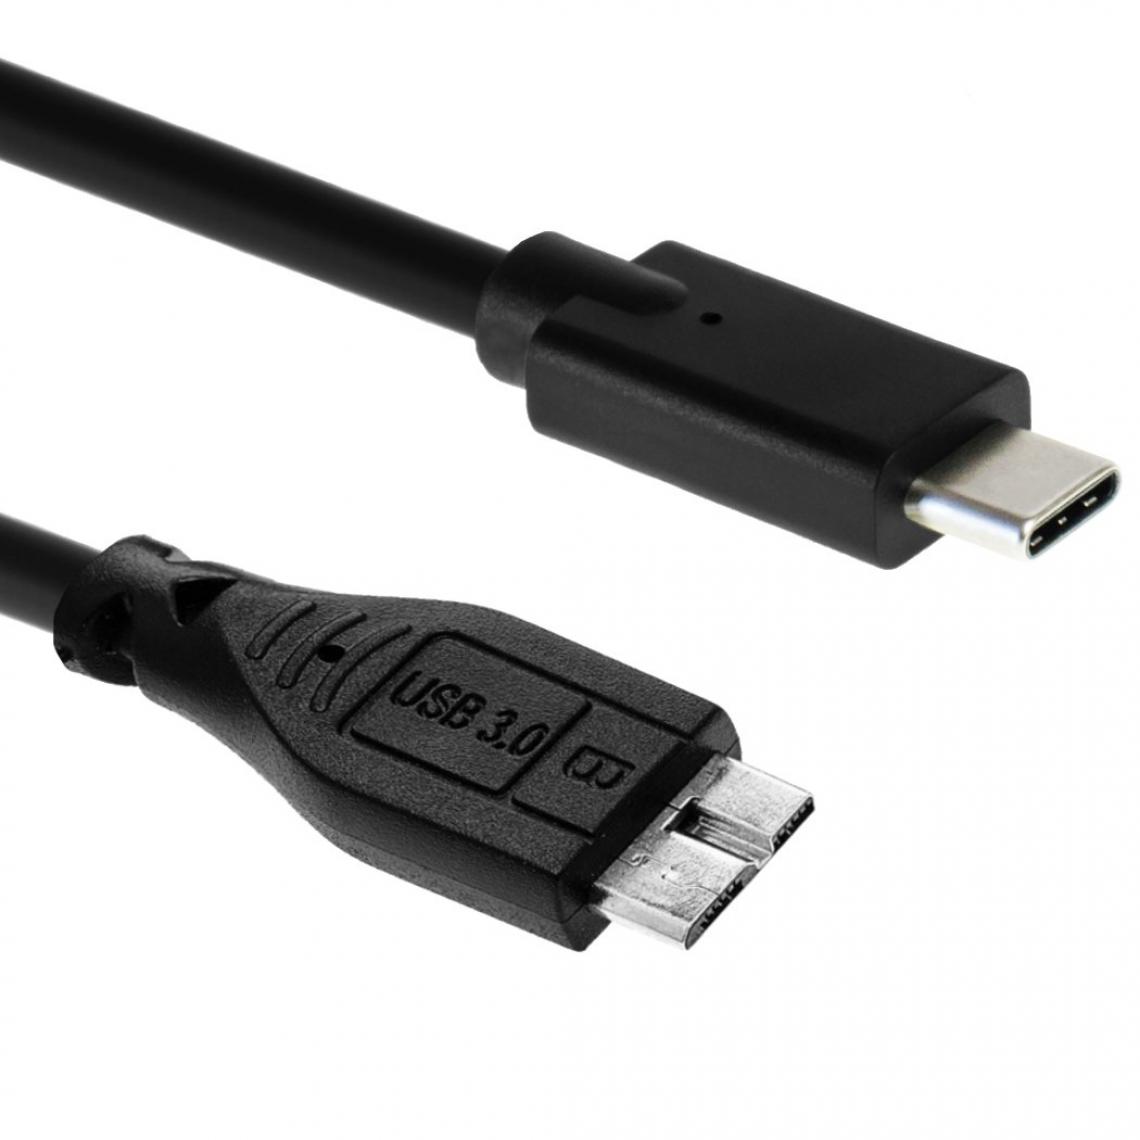 Ineck - INECK - Cable USB 3.0 Type C (USB-C) vers Micro-B pour Macbook Chromebook Pixel - Câble antenne